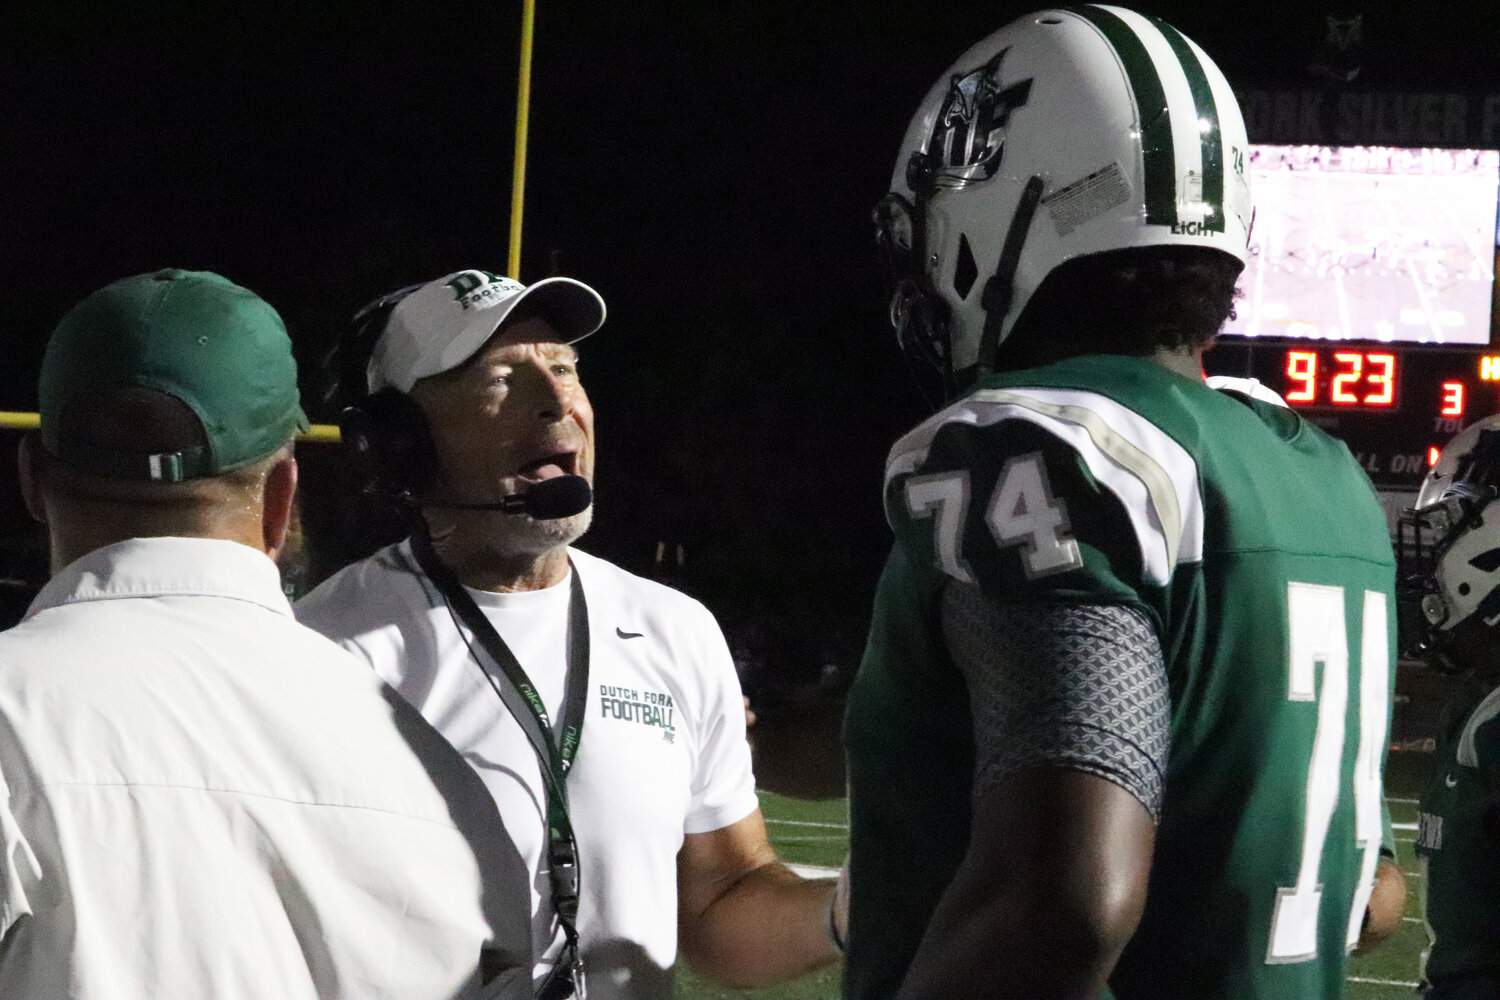 Longtime Dutch Fork head coach Tom Knotts is challenging his team to overcome adversity in the midst of a 2-4 start to the season.